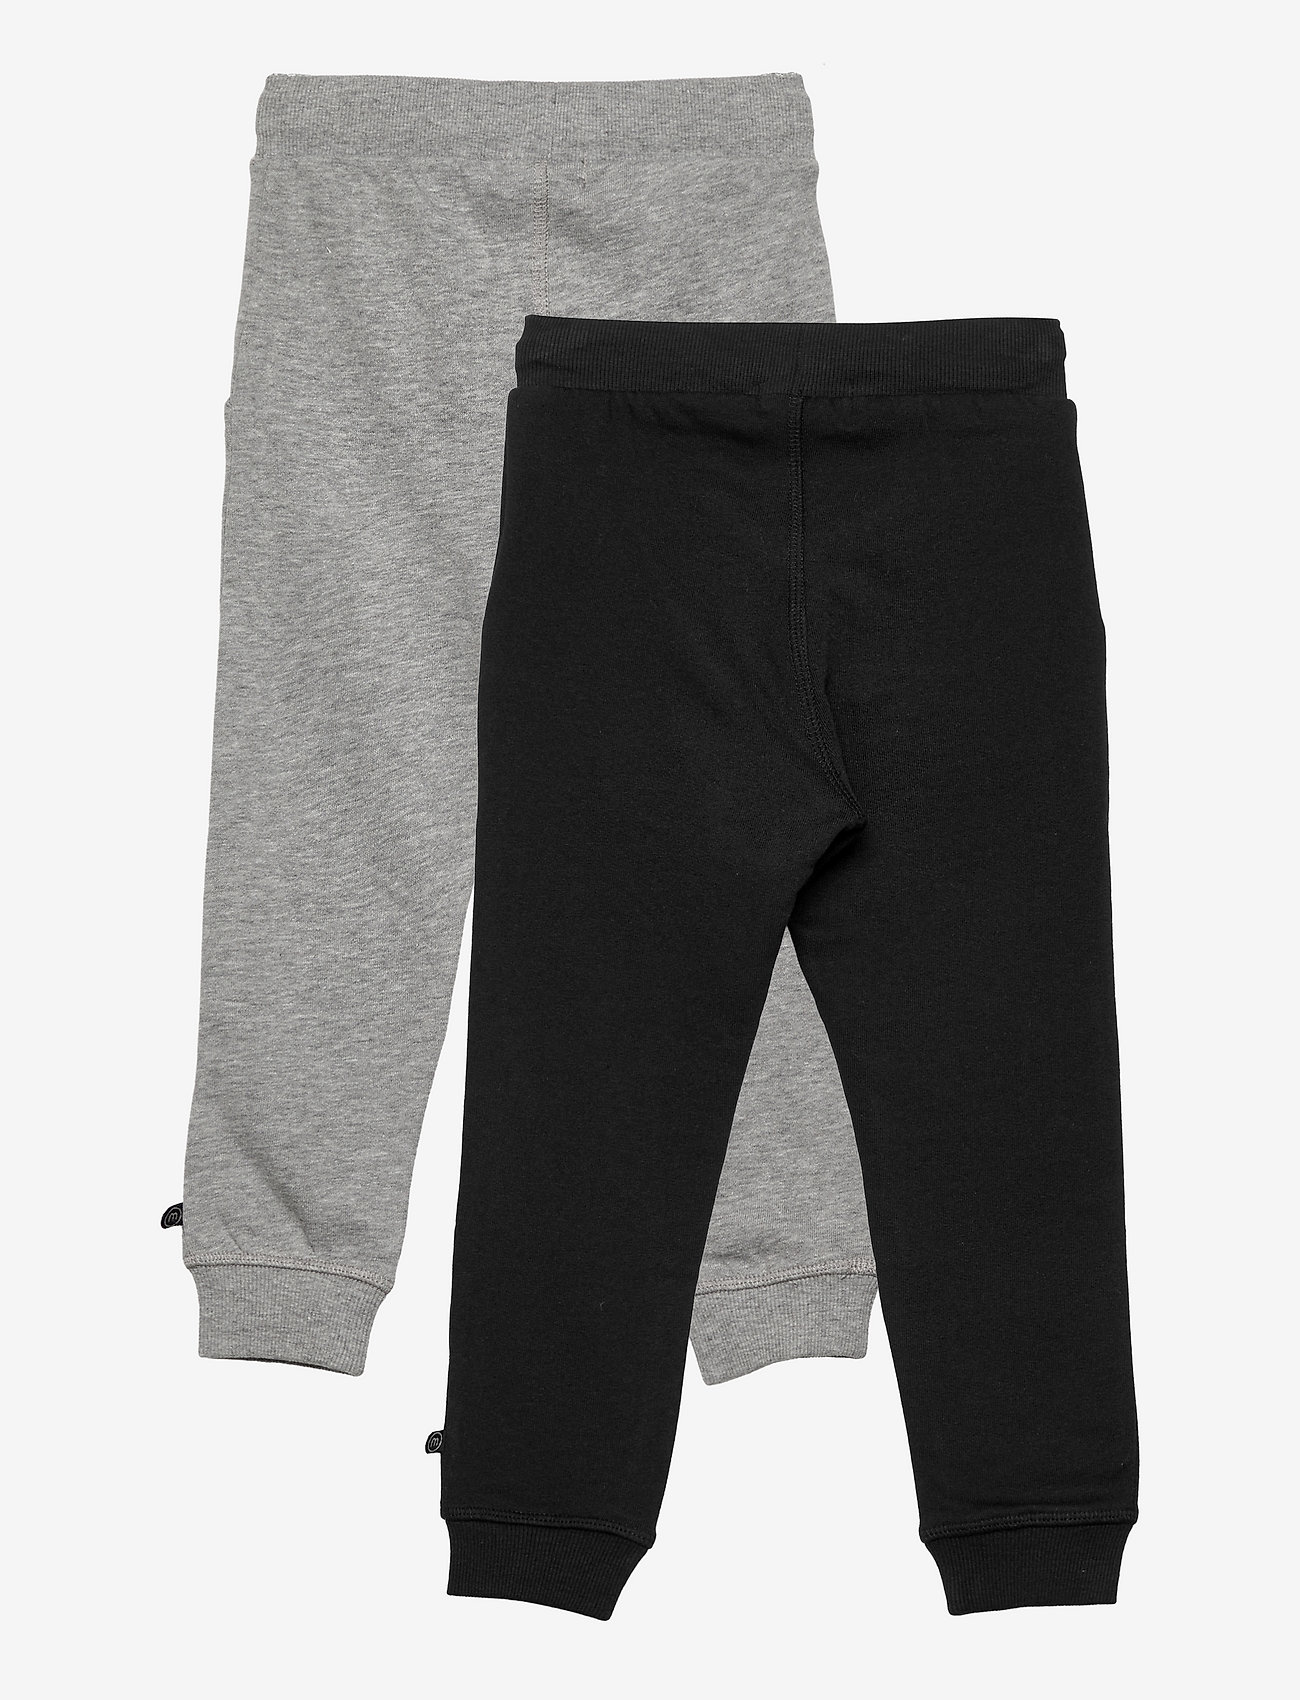 Minymo - Basic 36 -Sweat pant (2-pack) - lowest prices - anthacite black - 1